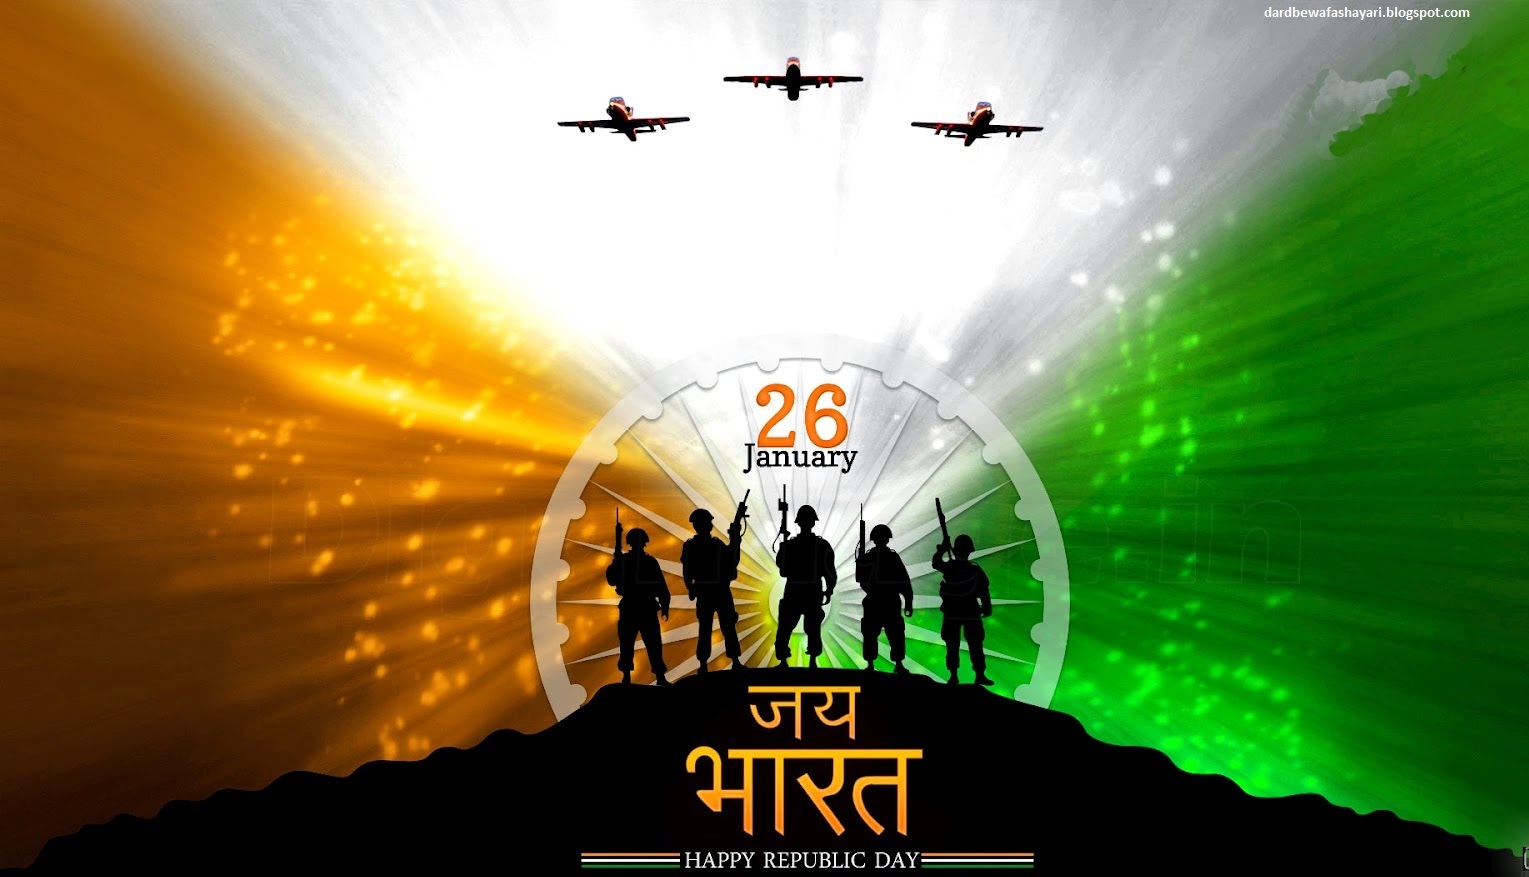 republic day wallpaper hd,poster,sky,movie,graphic design,photography